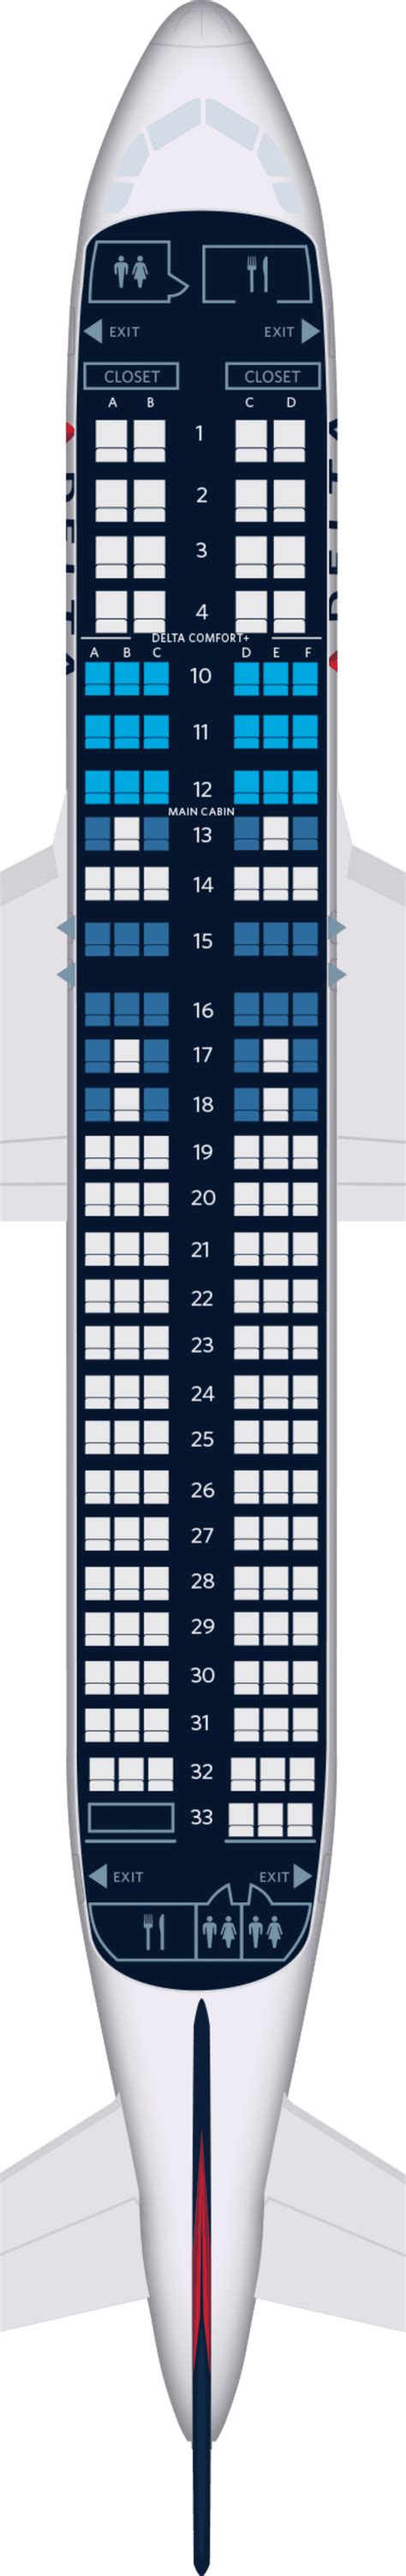 Airbus A320 Seating Chart Allegiant